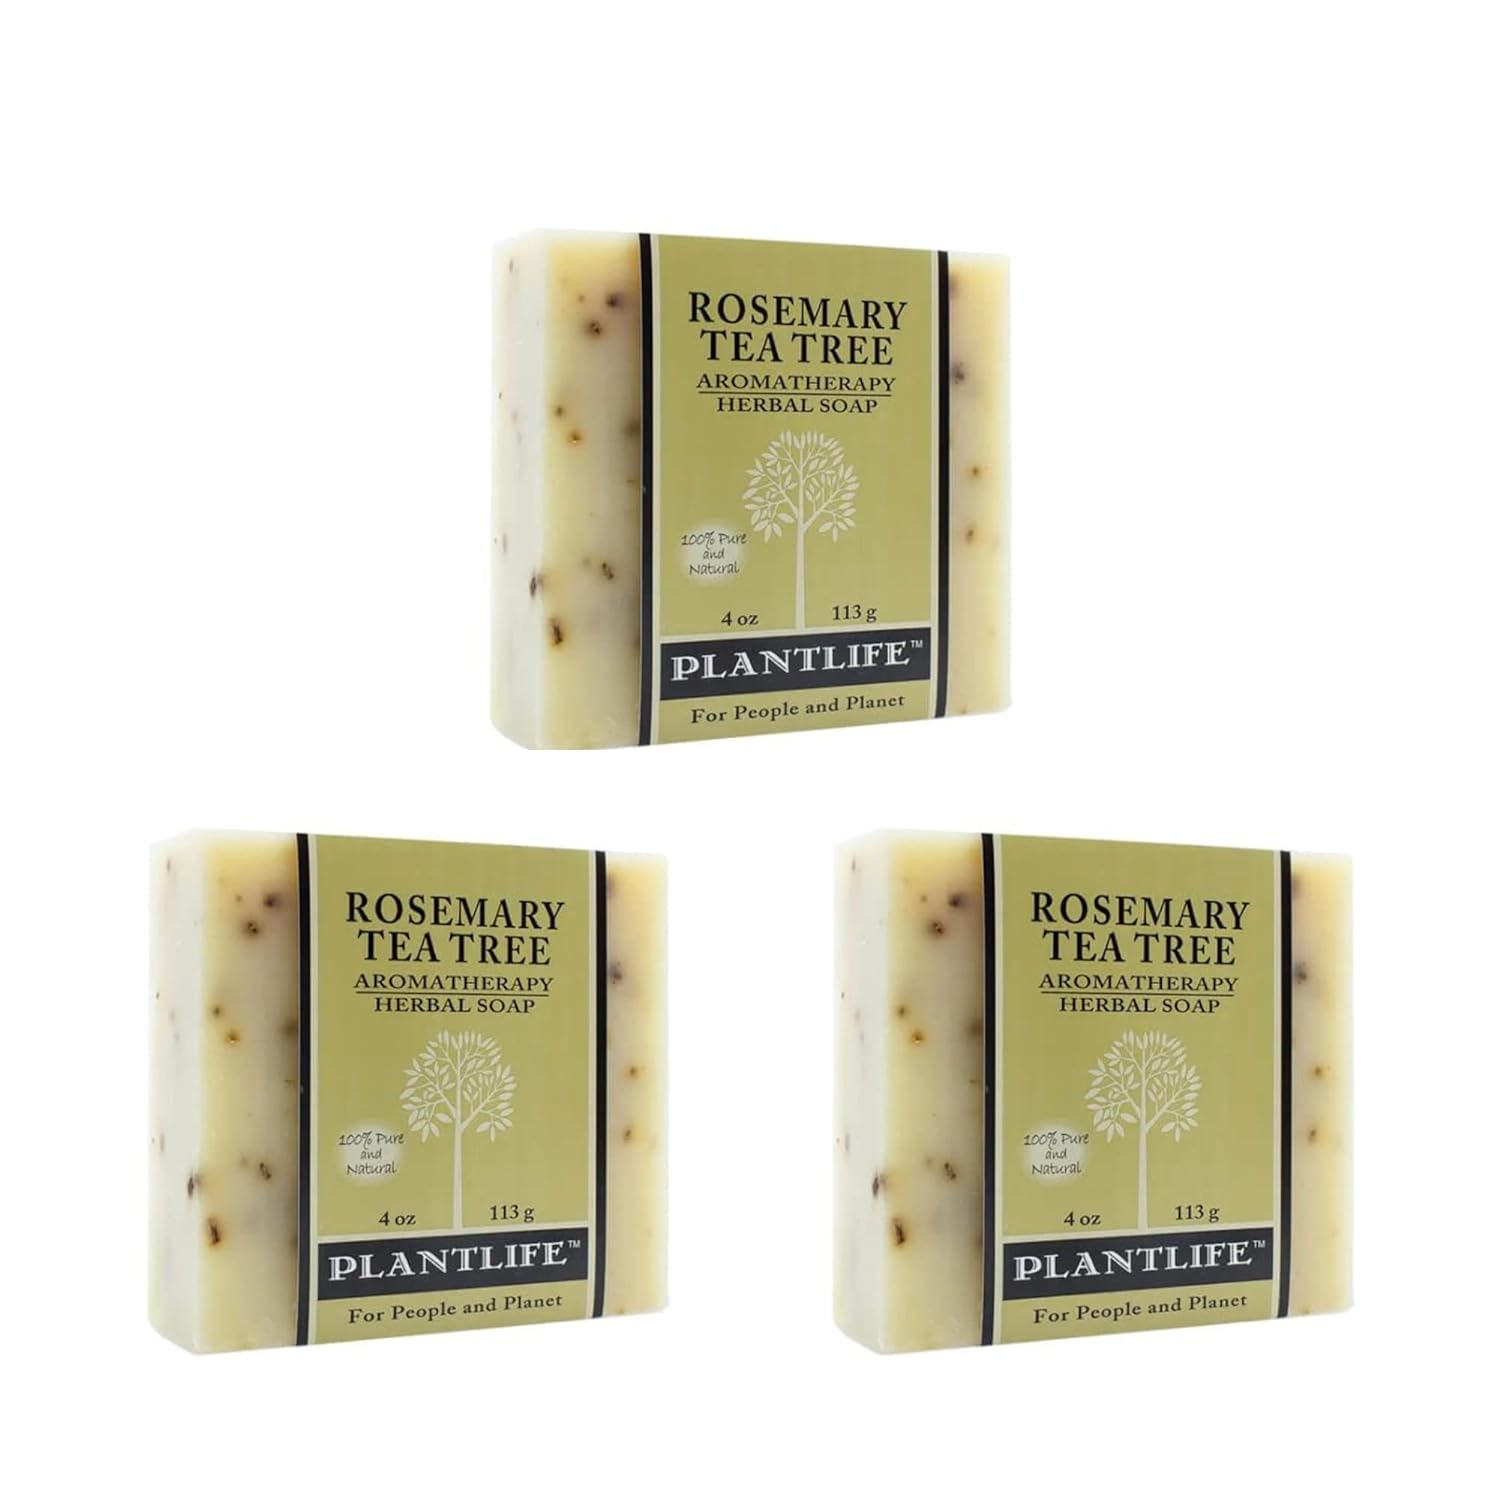 Plantlife Rosemary Tea Tree 3-Pack Bar Soap - Moisturizing and Soothing Soap for Your Skin - Hand Crafted Using Plant-Based Ingredients - Made in California 4 Bar